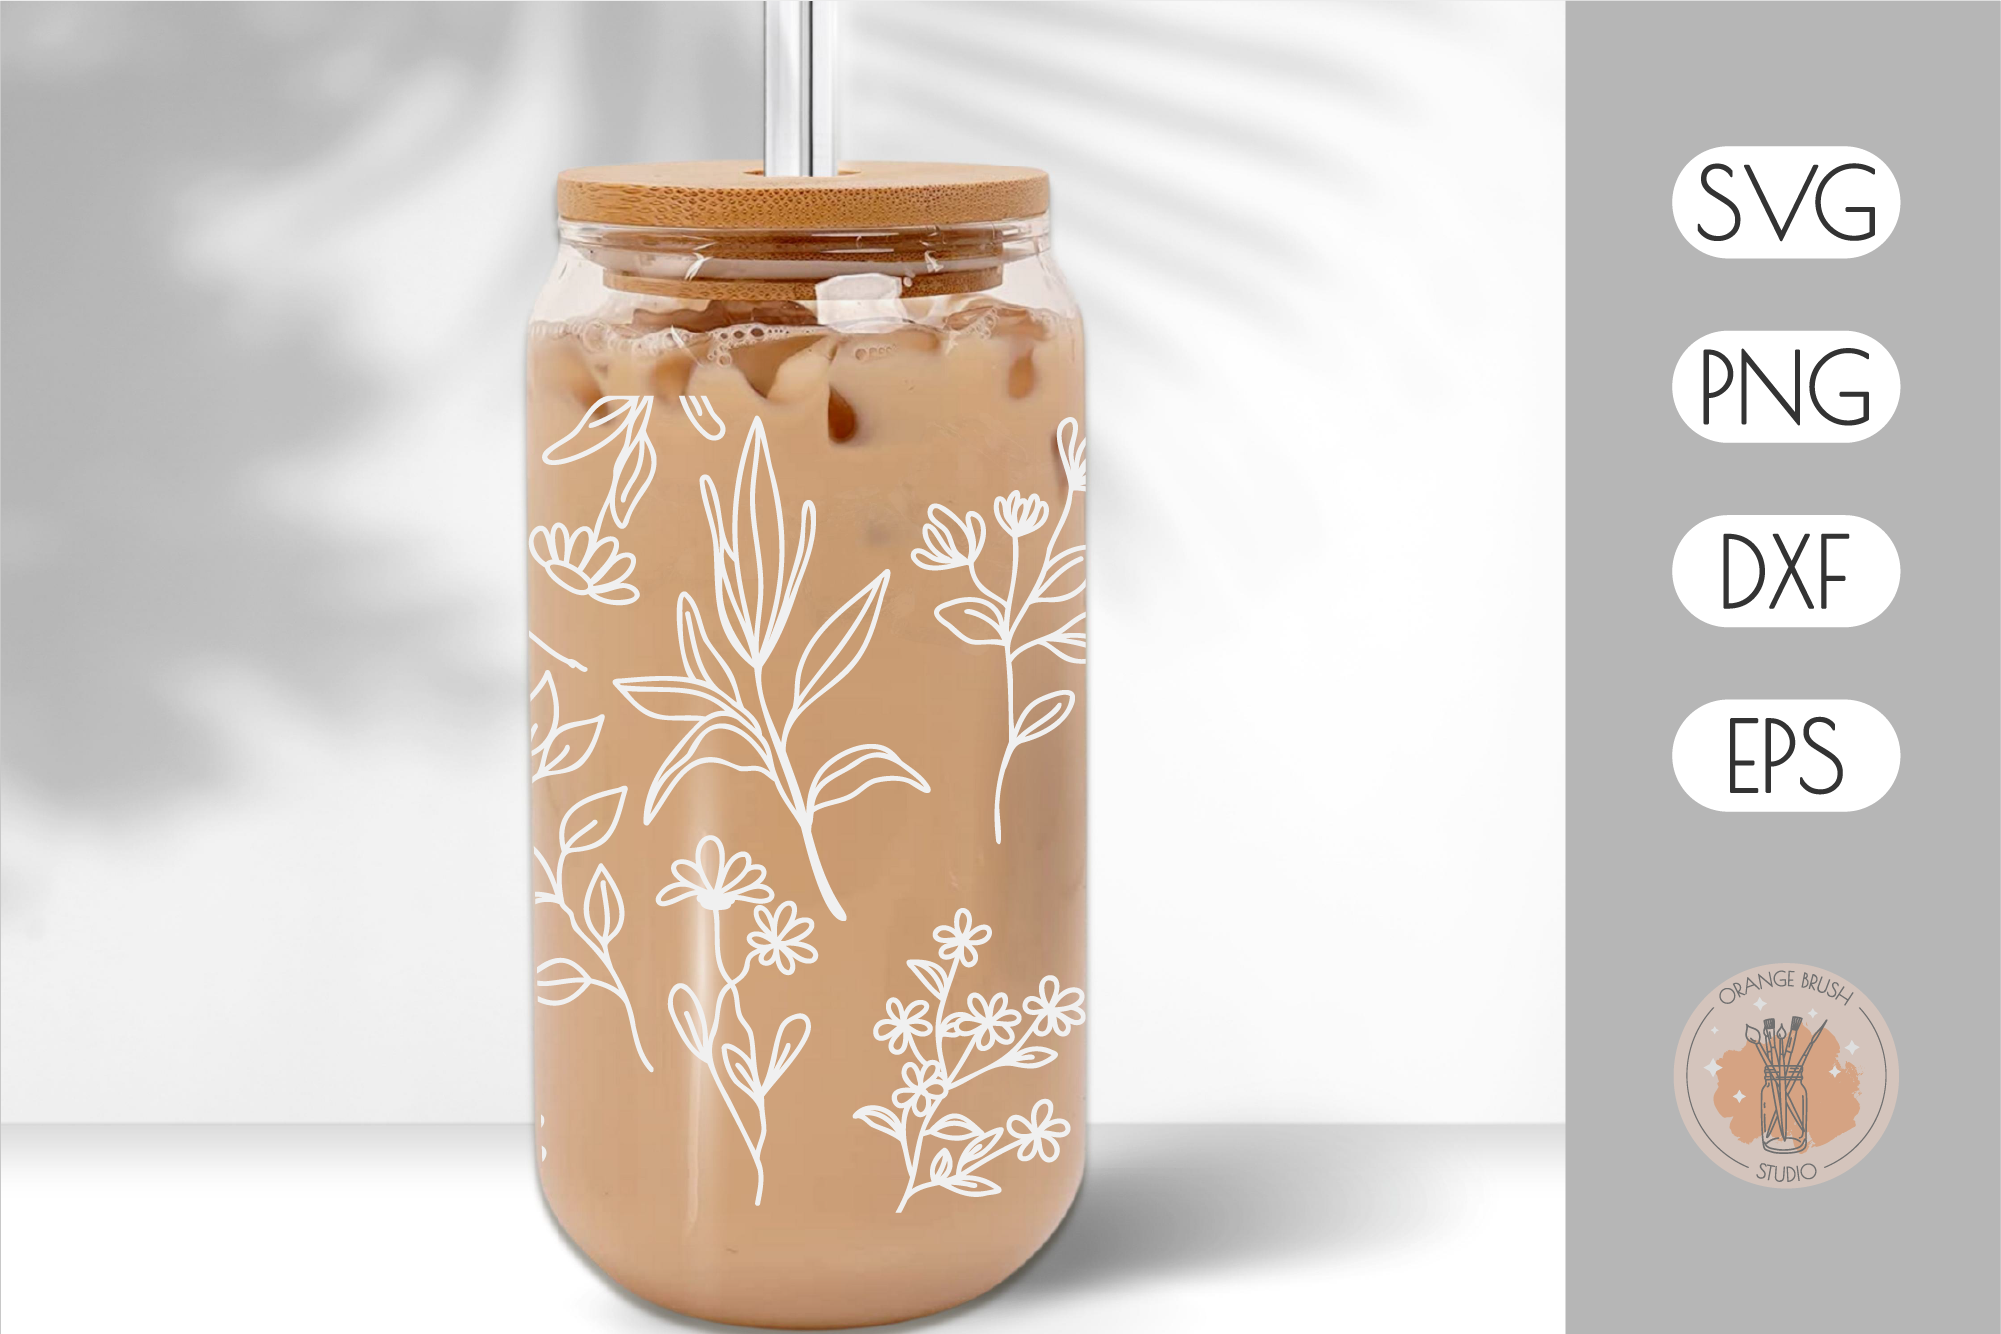 Layering Vinyl on a Libbey Glass Beer Can + Free Wrap Design 